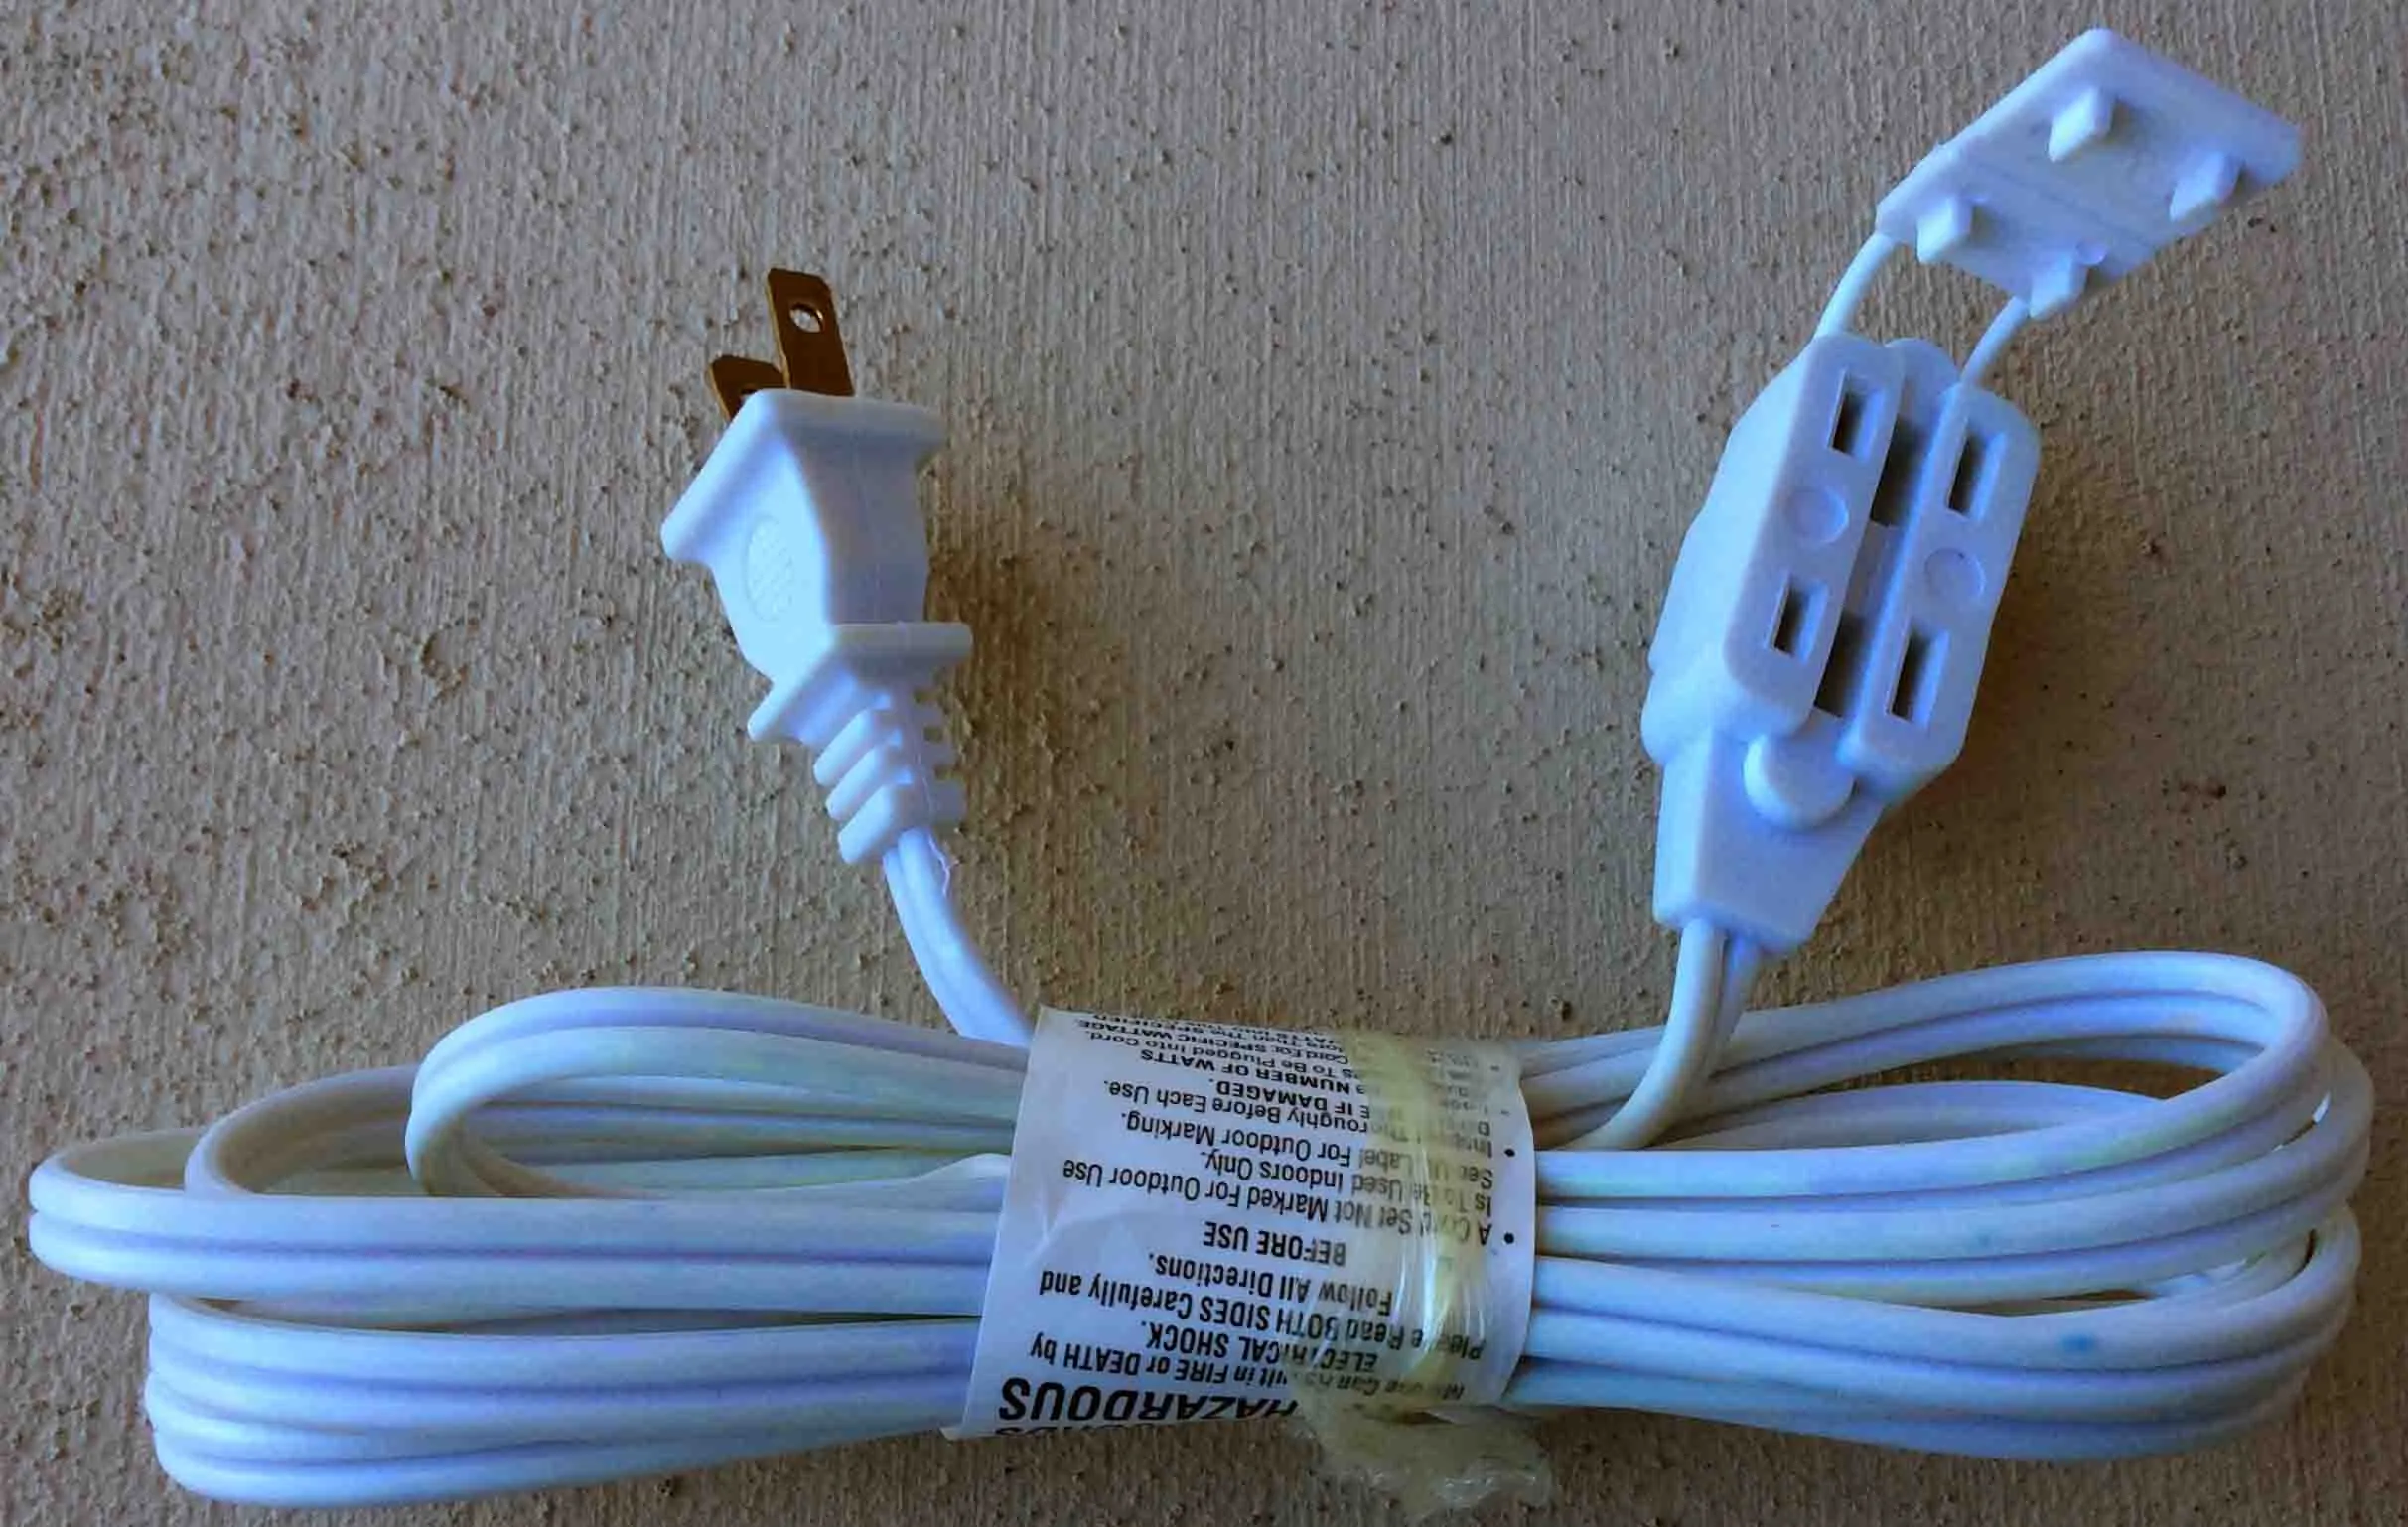 How Often Should You Inspect An Extension Cord?